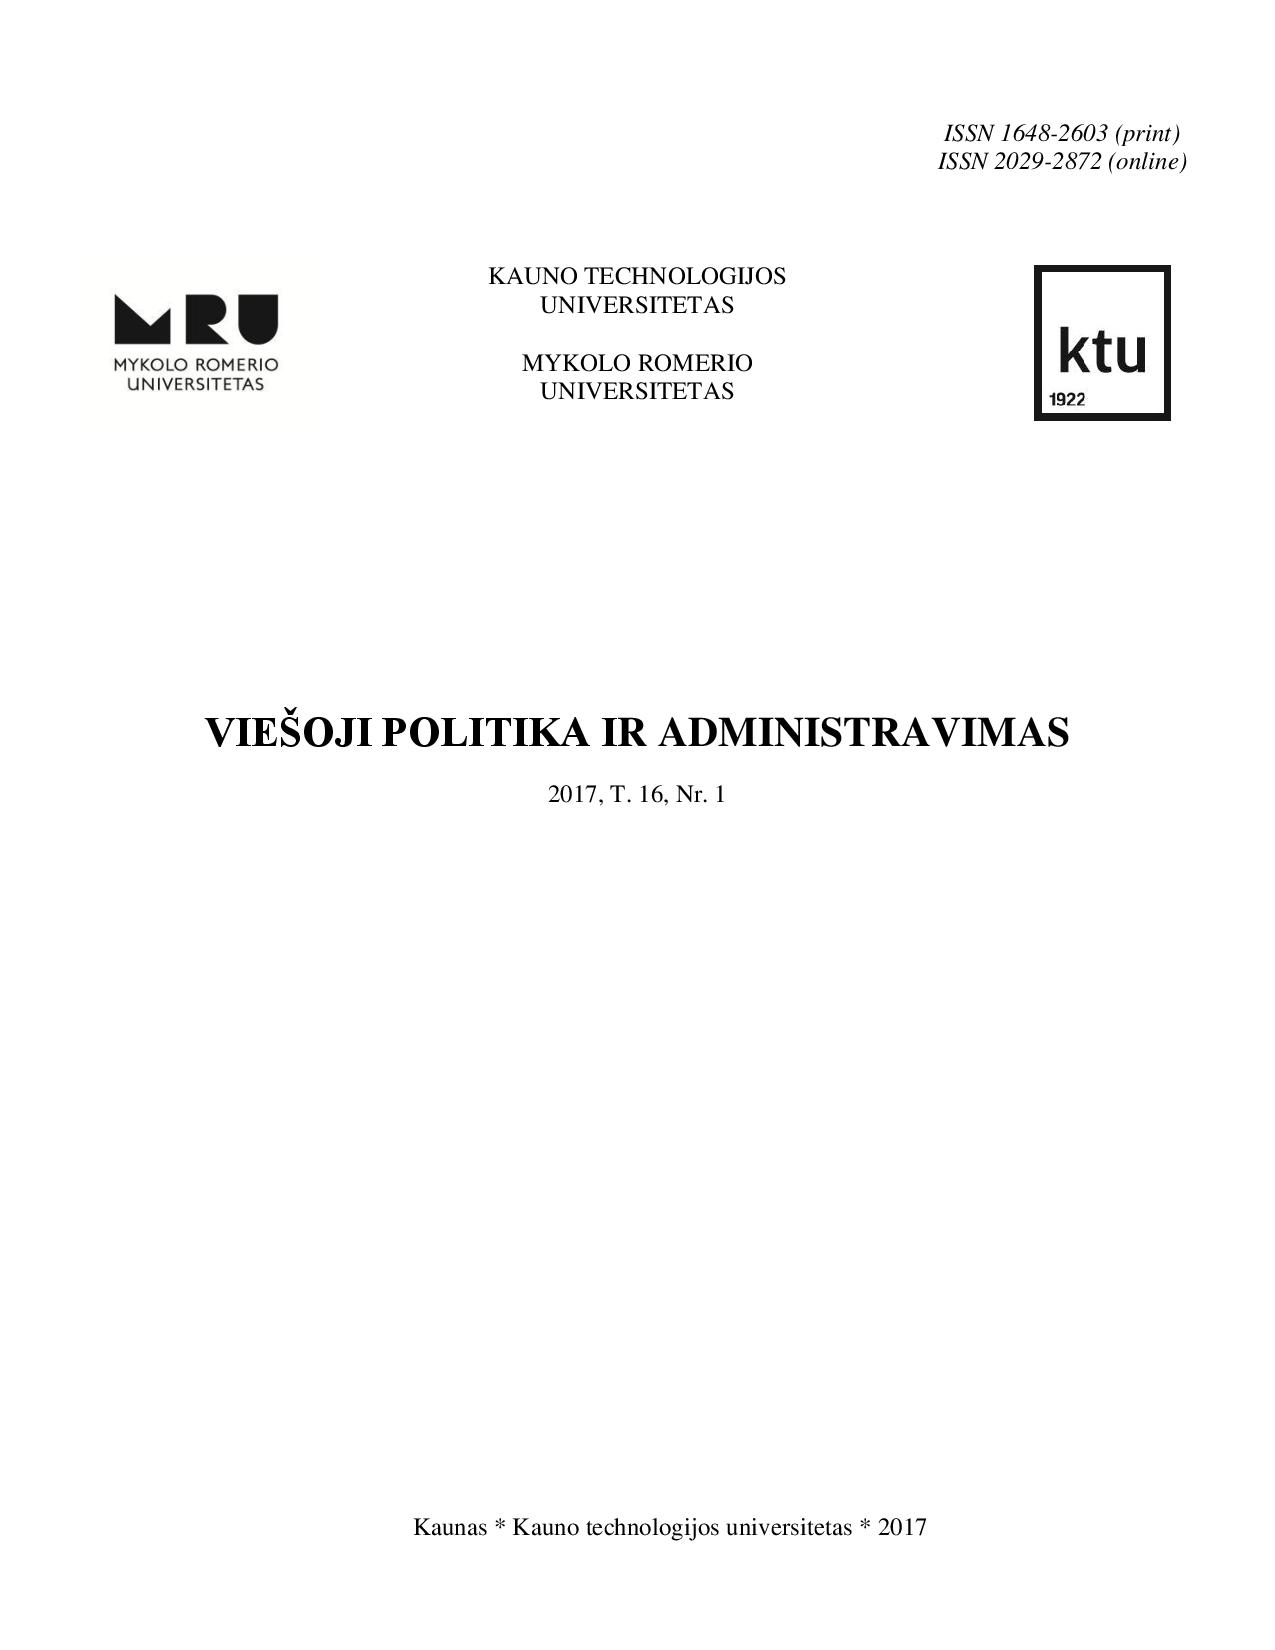 Party Patronage in Lithuanian Public Sector Cover Image